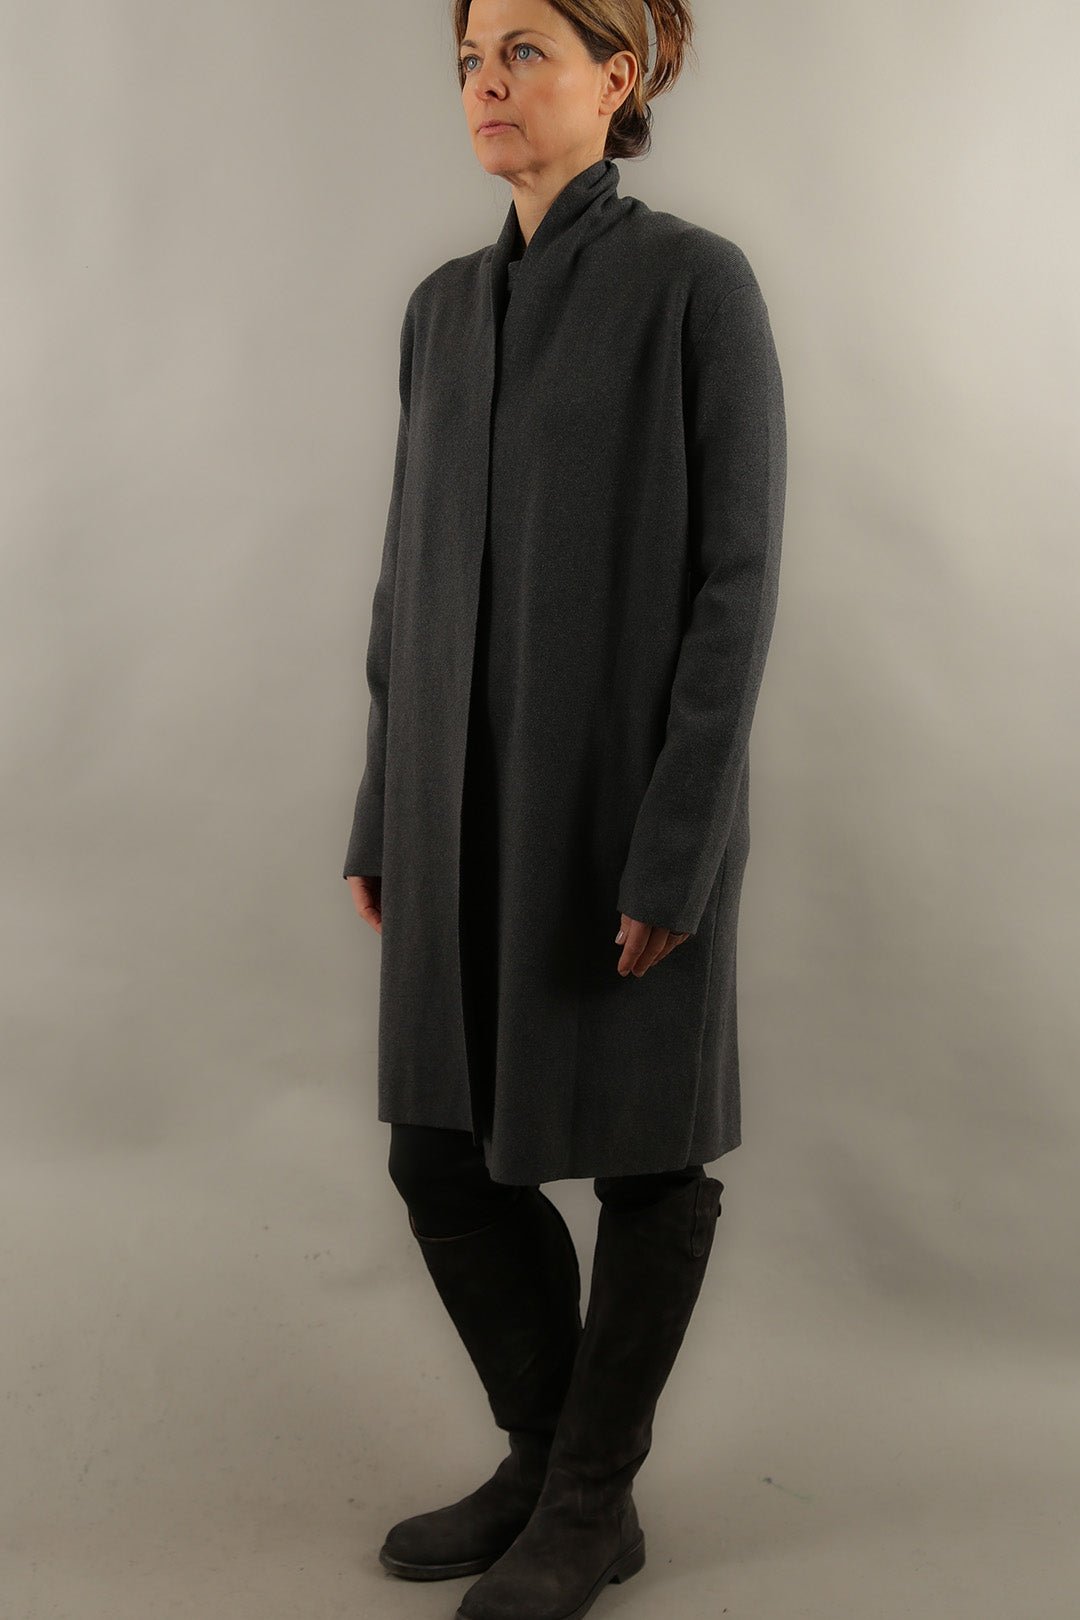 CORNELIA DUSTER IN DOUBLE KNIT HEATHERED PIMA COTTON IN CHARCOAL HEATHER - Jarbo